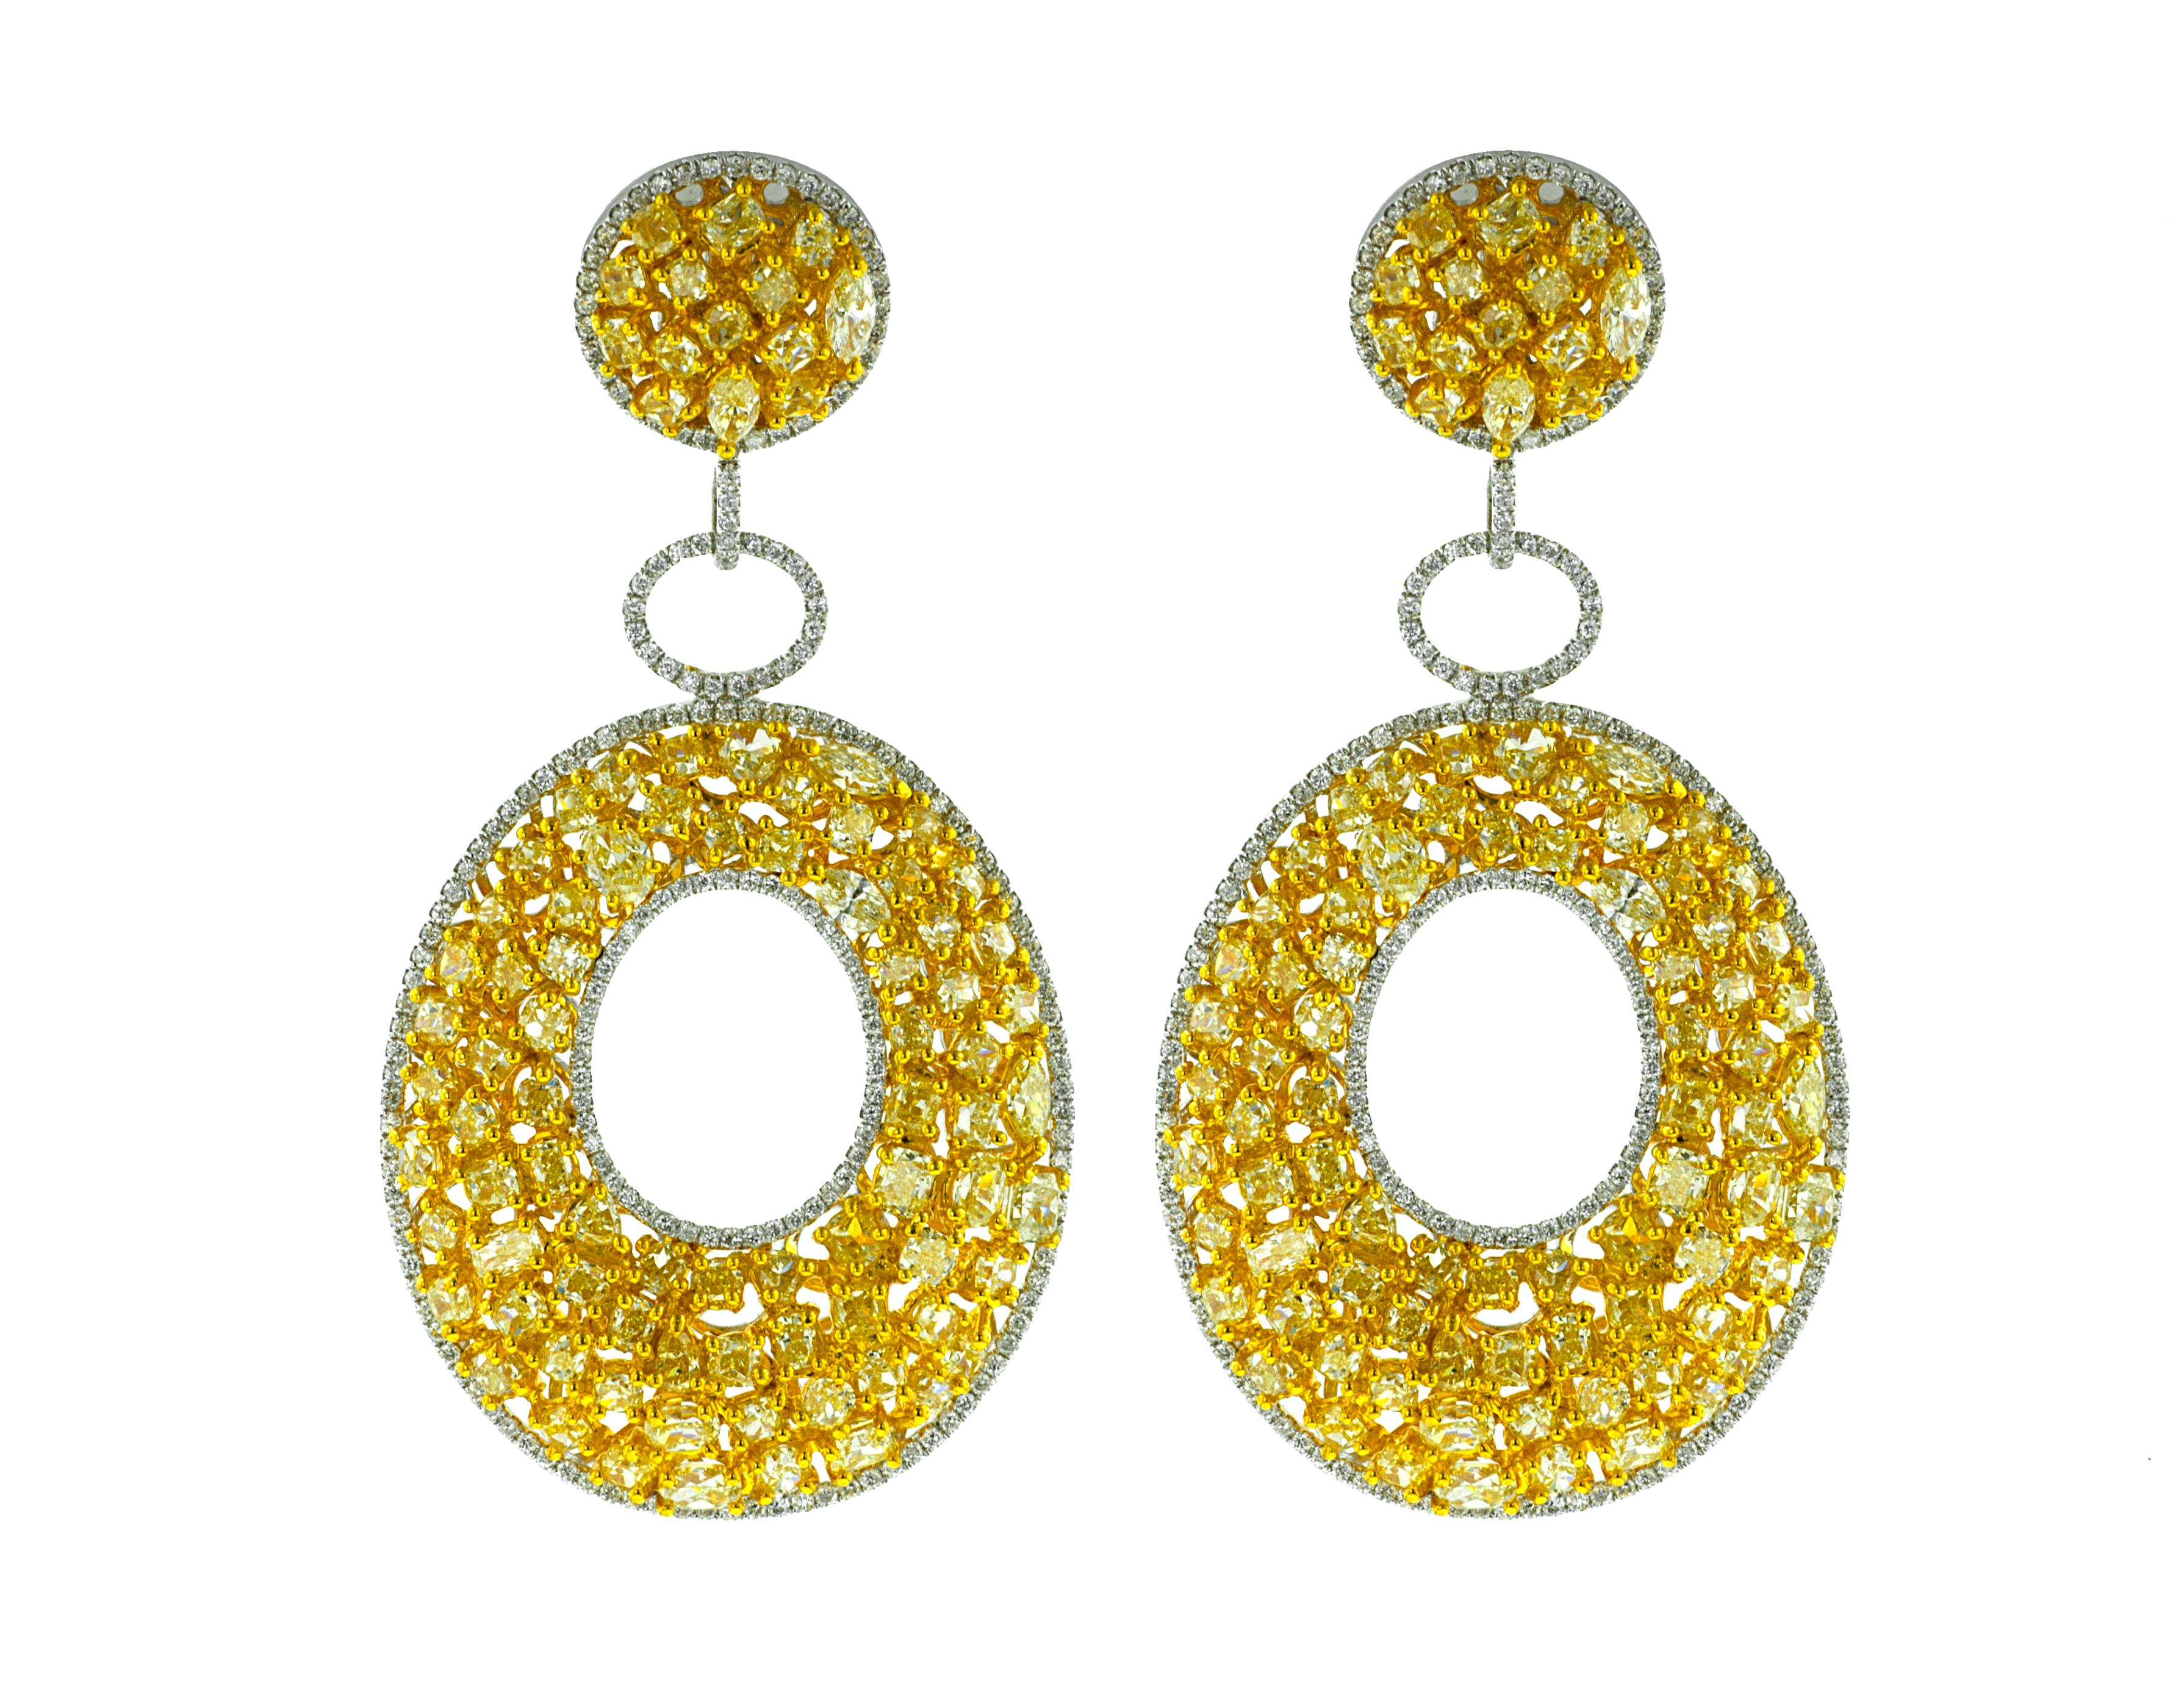 Modern Diana M. 18 kt White and Yellow Gold Fancy Diamond earrings containing 20.12 cts For Sale